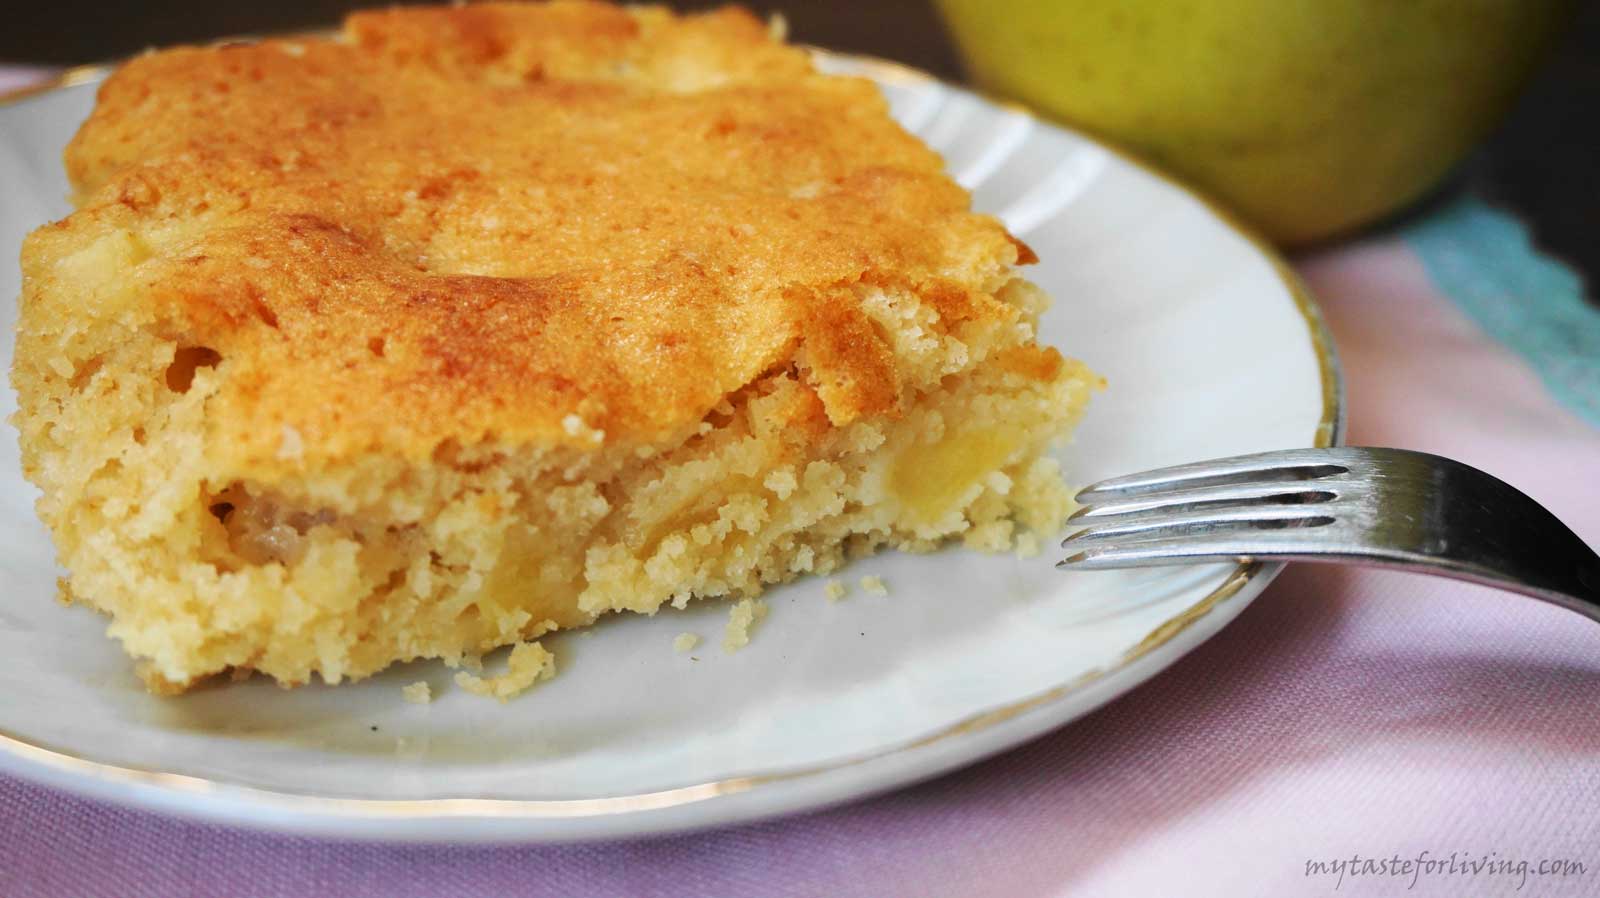 Sweet cake with fresh and juicy apples!